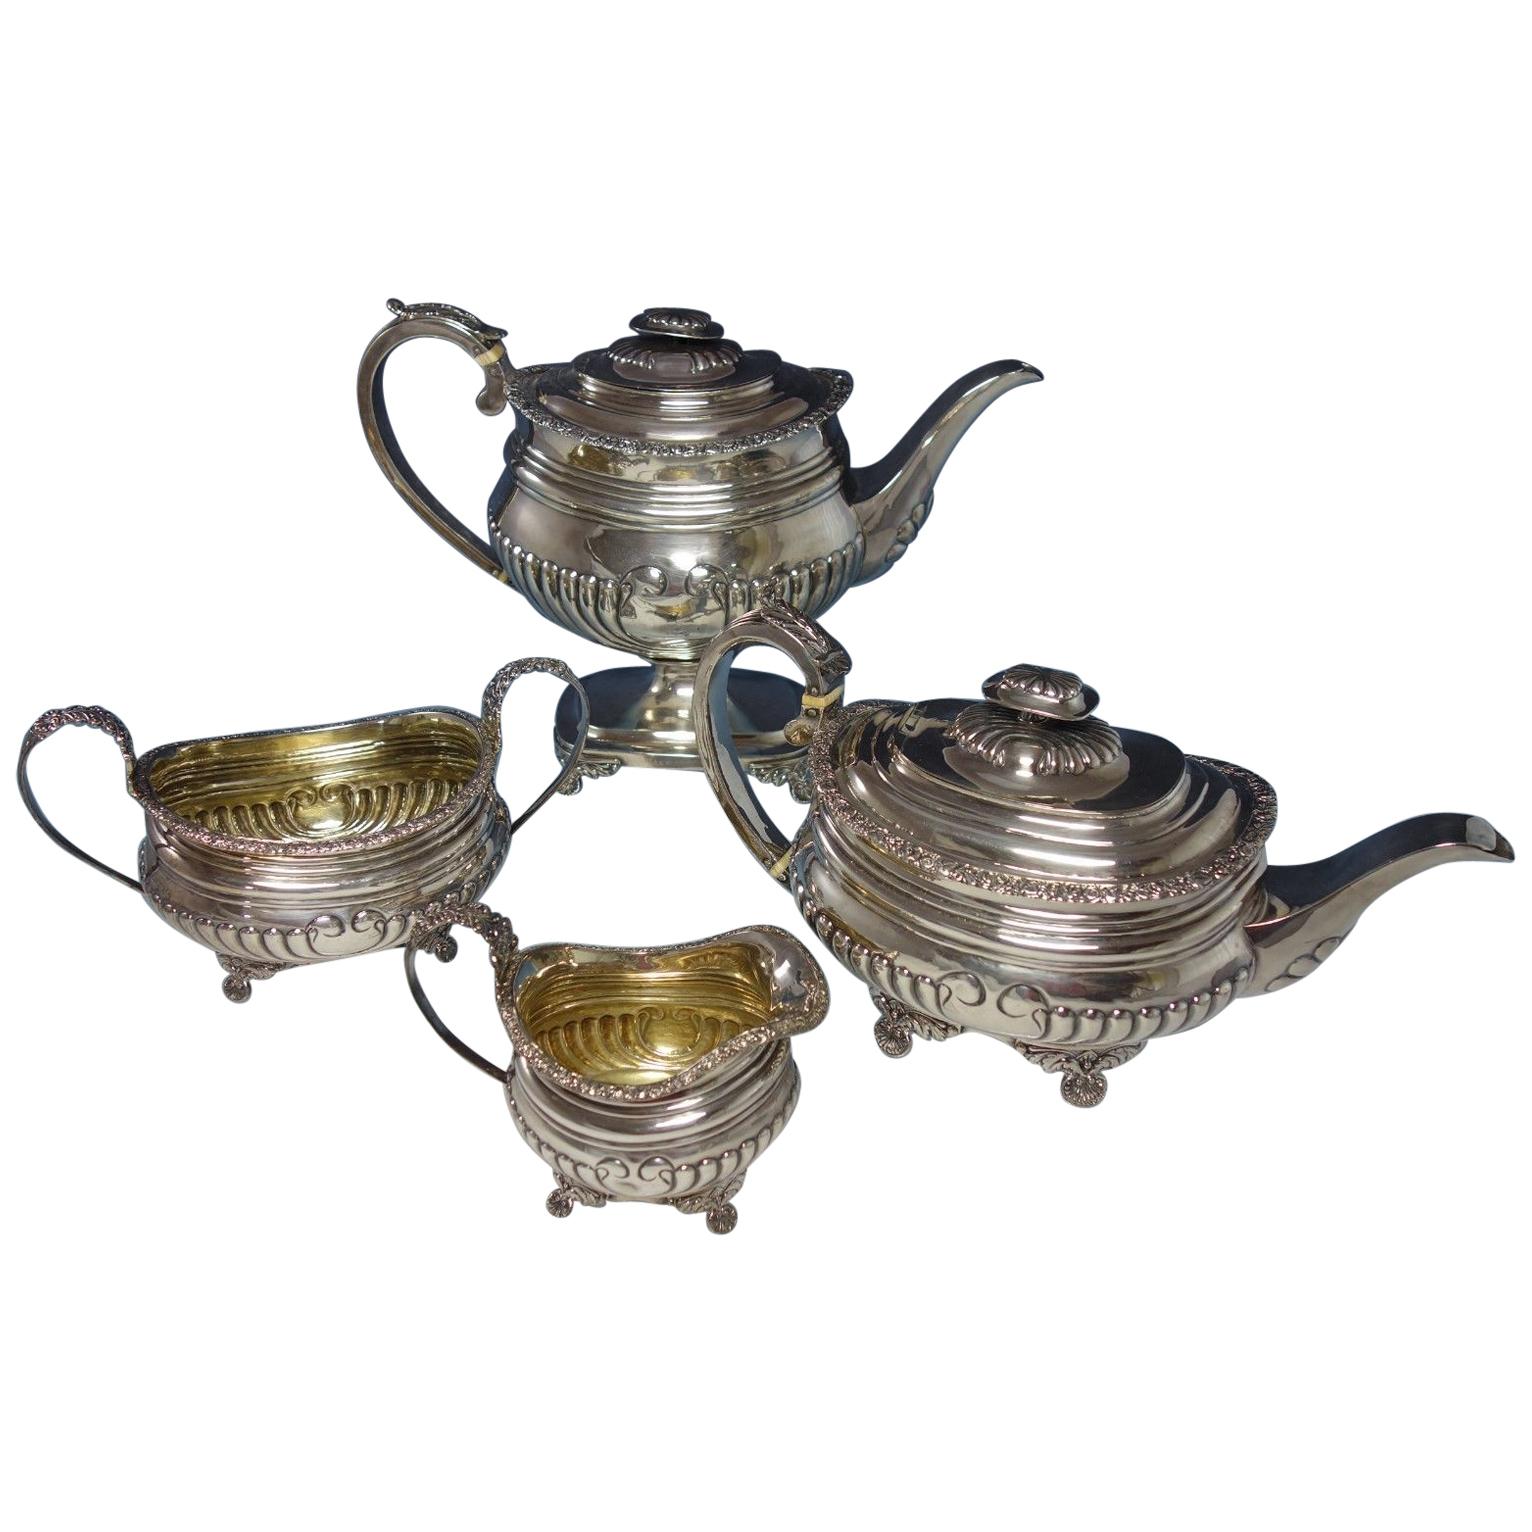 Thomas Bowen English Sterling Silver Coffee Set 4-Piece with Floral Border